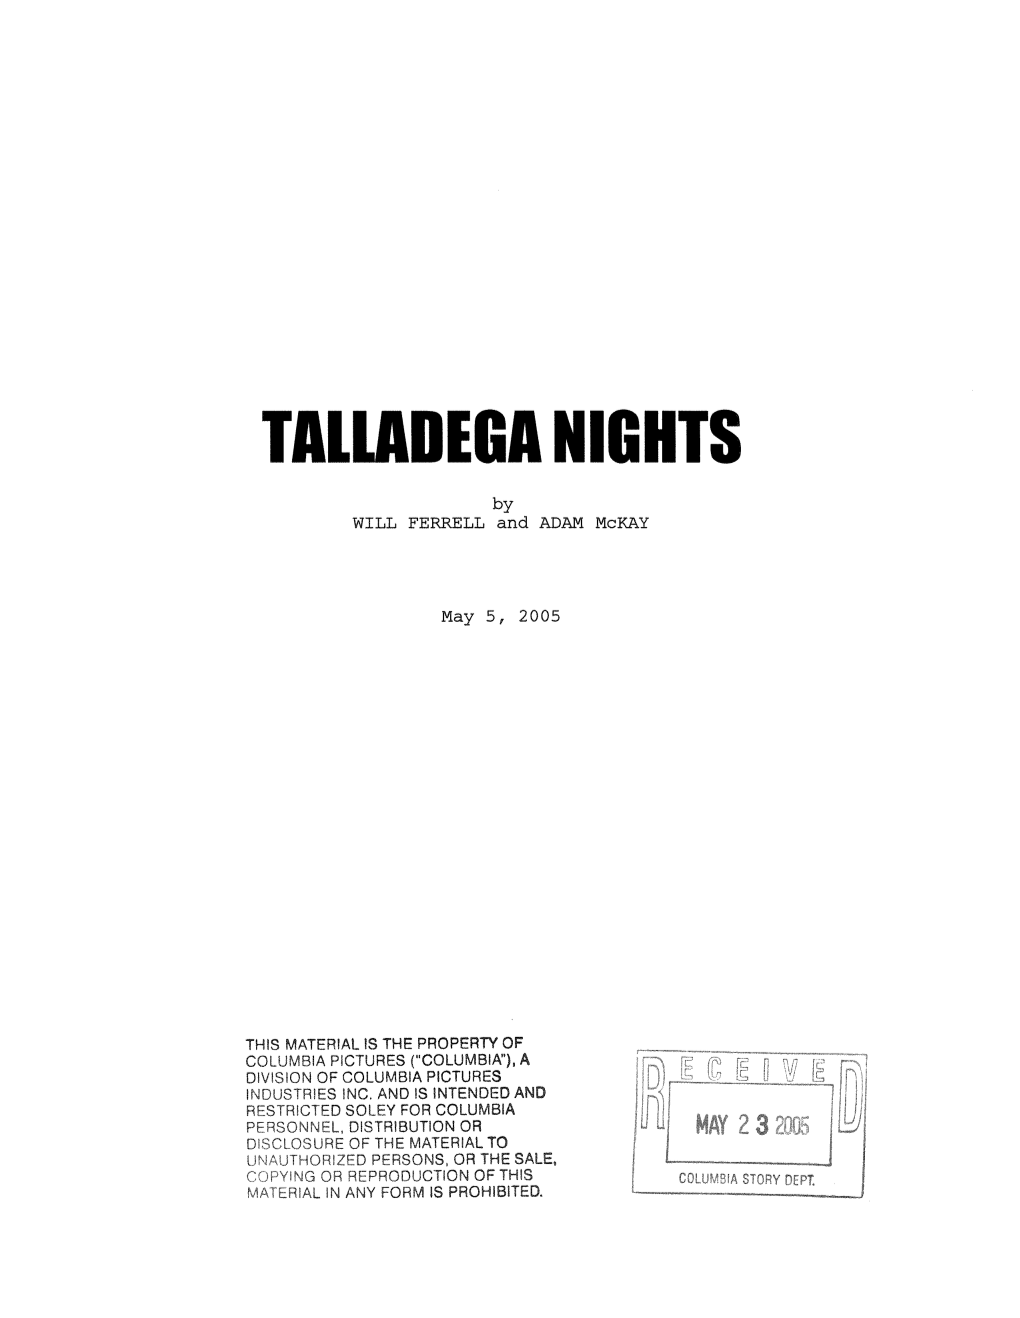 TALLADEGA NIGHTS 05-05-05 DO NOT GIVE OUT.Pdf